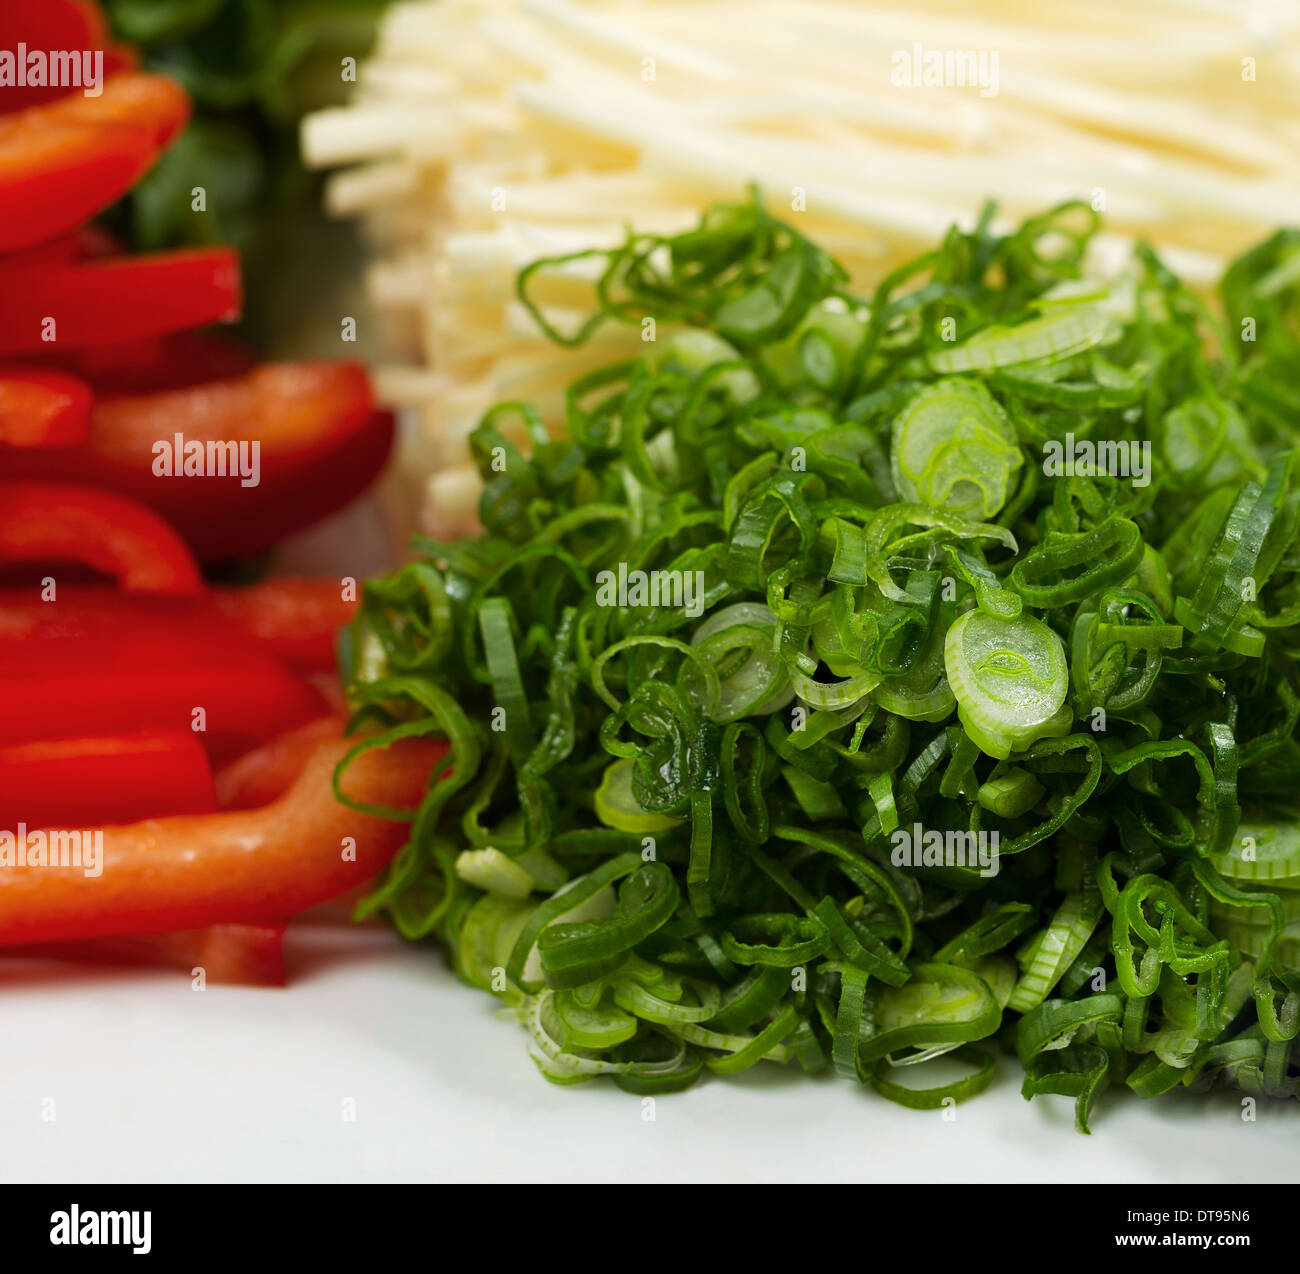 Closeup photo of fresh sliced green onions used as sushi ingredients placed in white plate along with mushrooms and red peppers Stock Photo